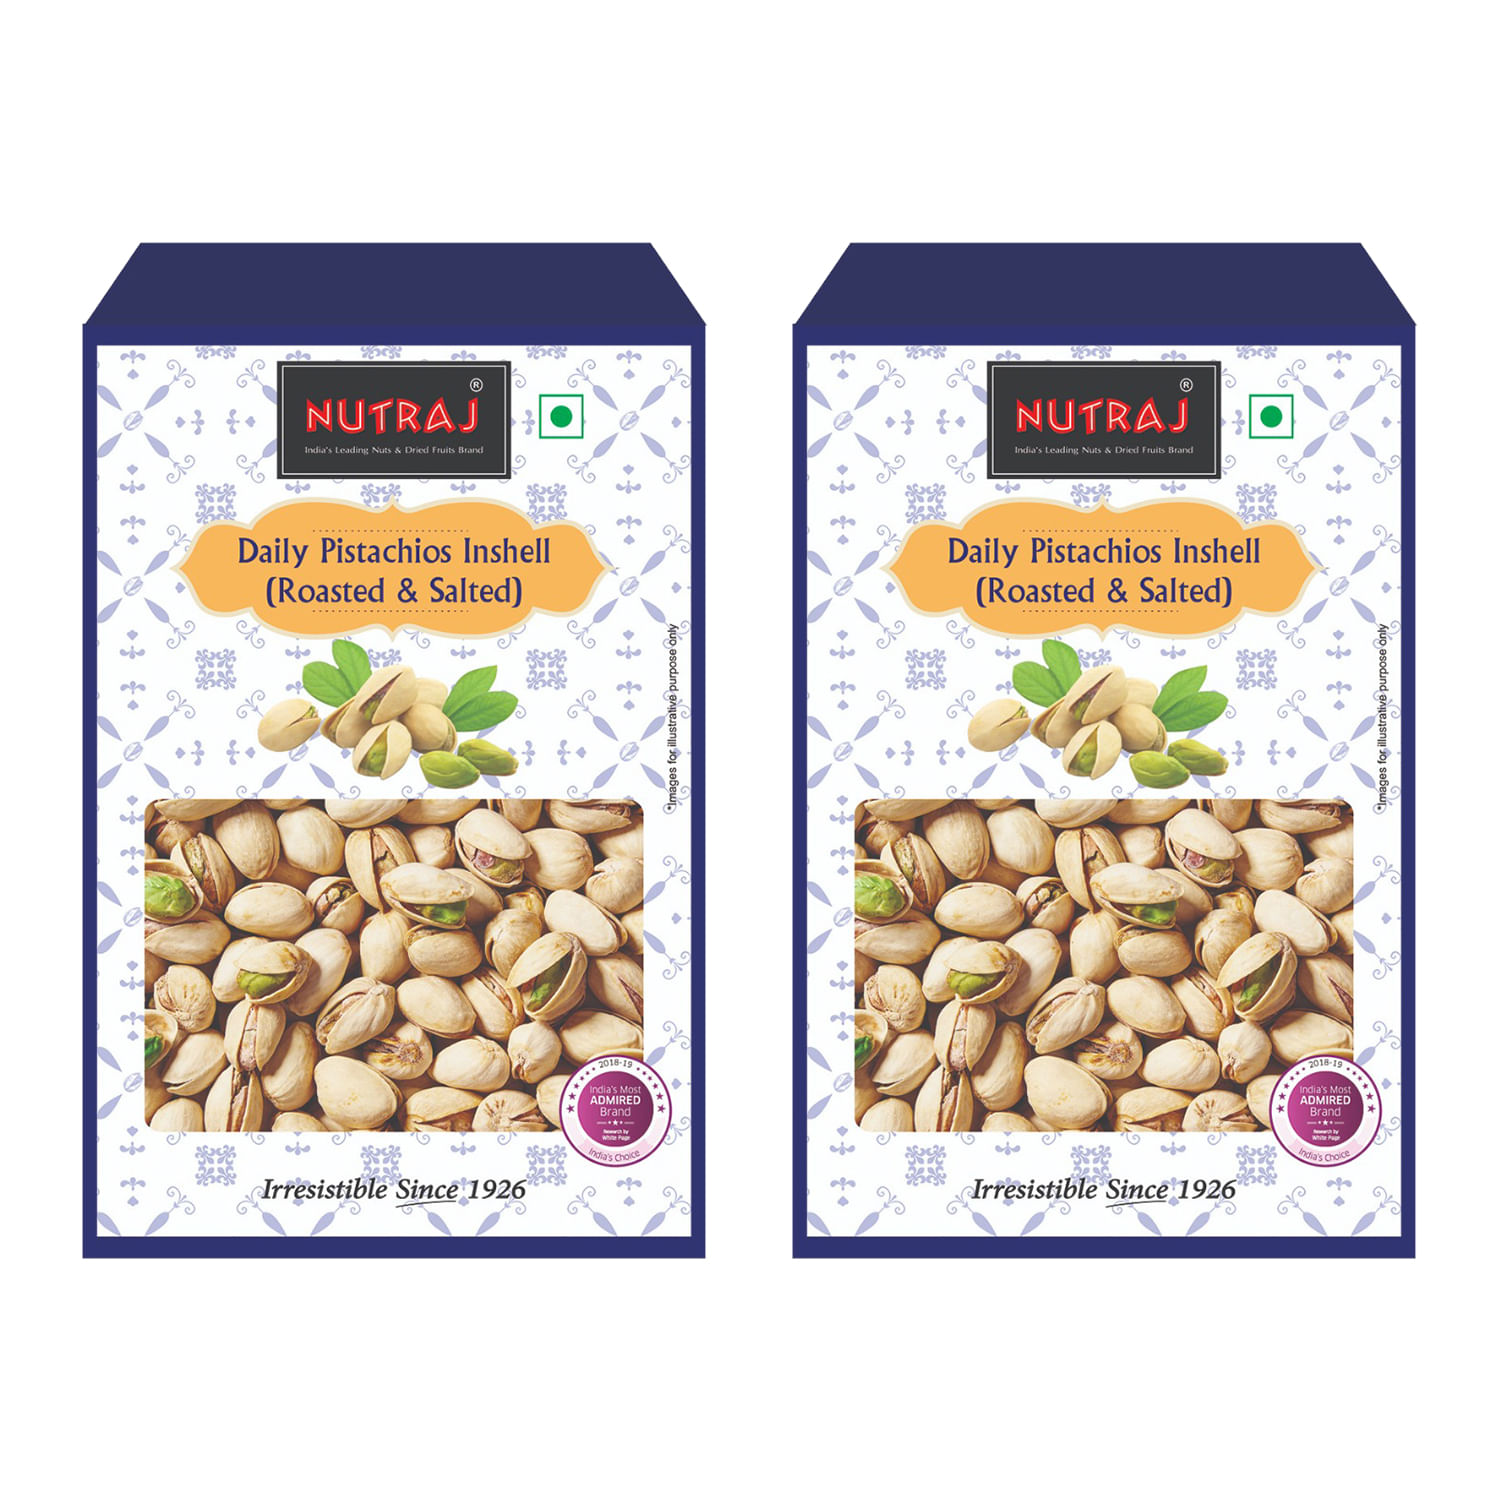 Nutraj Daily Pistachios In shell Roasted and Salted 1Kg (2 X 500g)